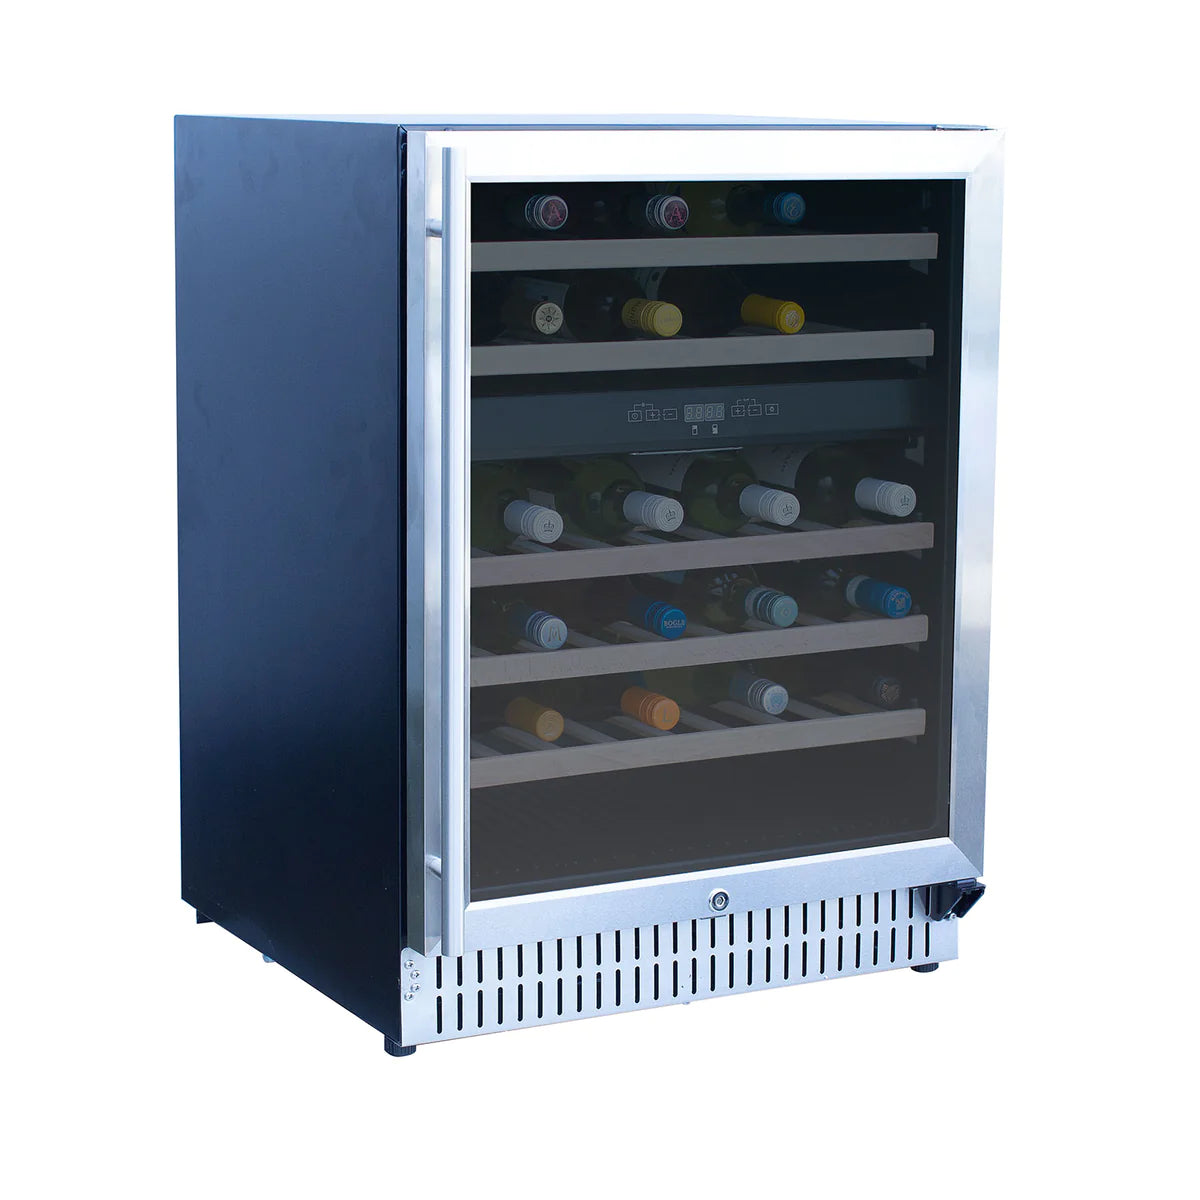 24" Outdoor Rated Dual Zone Wine Cooler